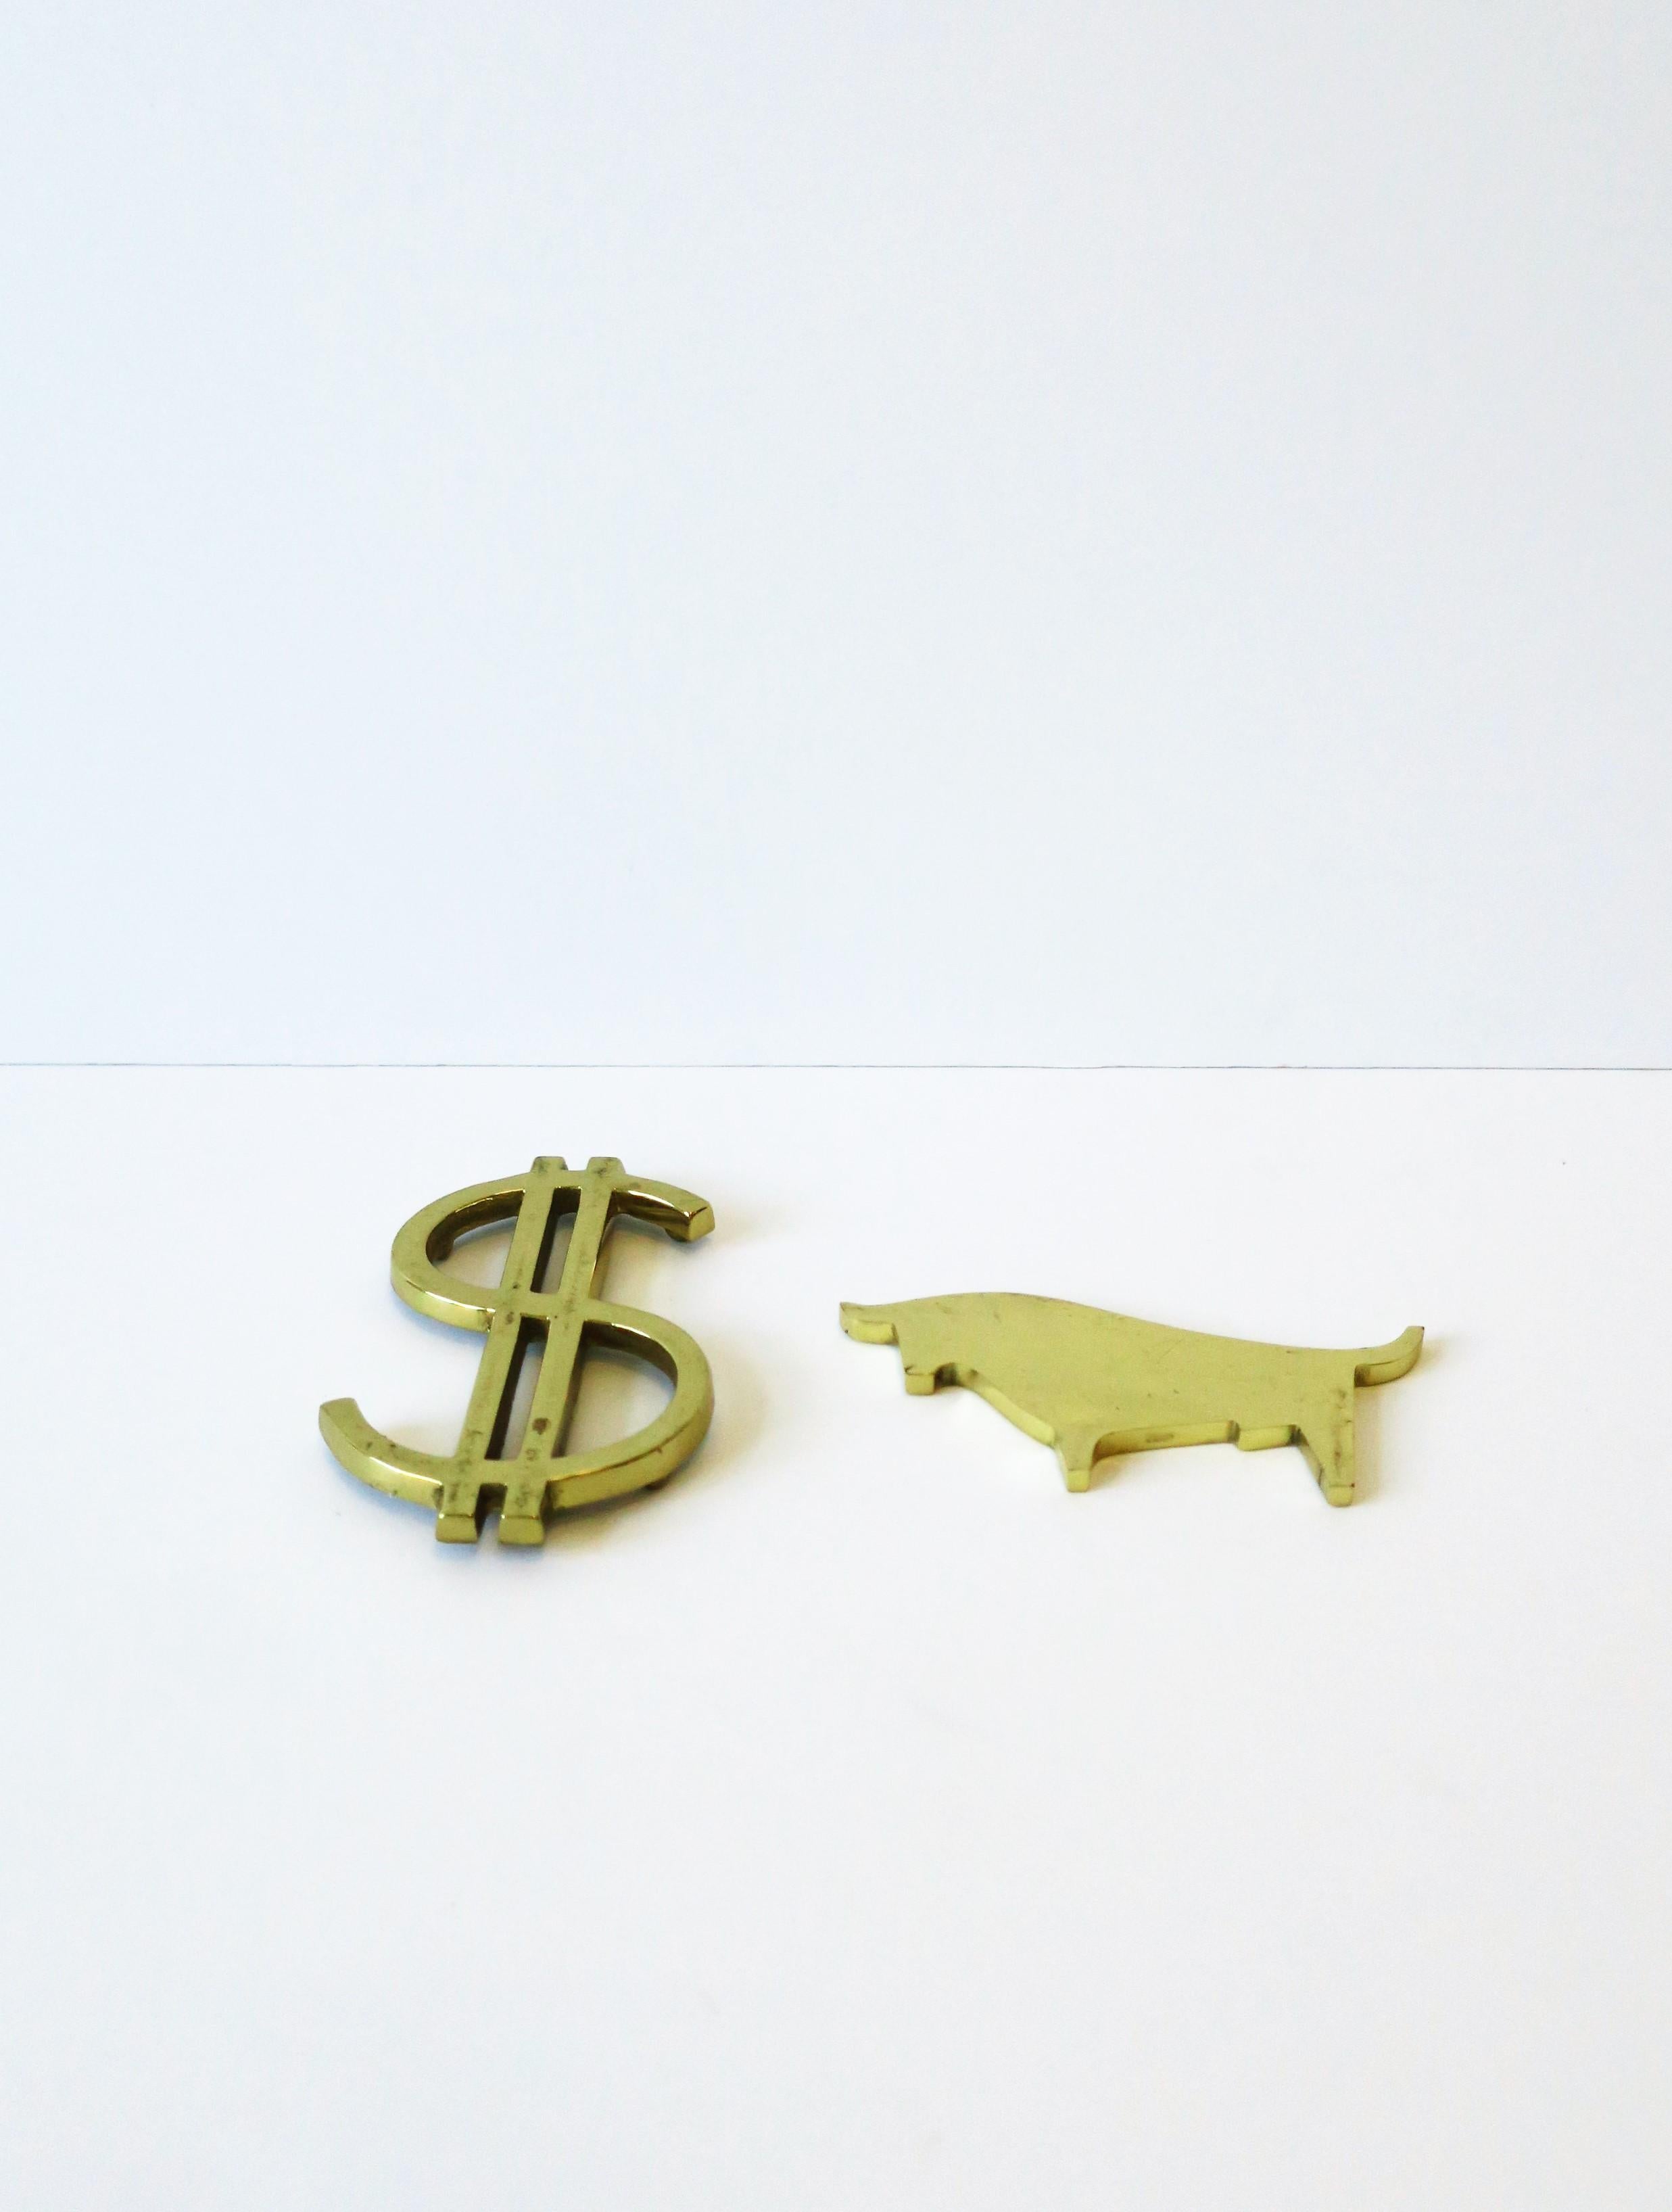 Lacquered Wall Street Dollar Sign and Bull Brass Desk Paperweights For Sale